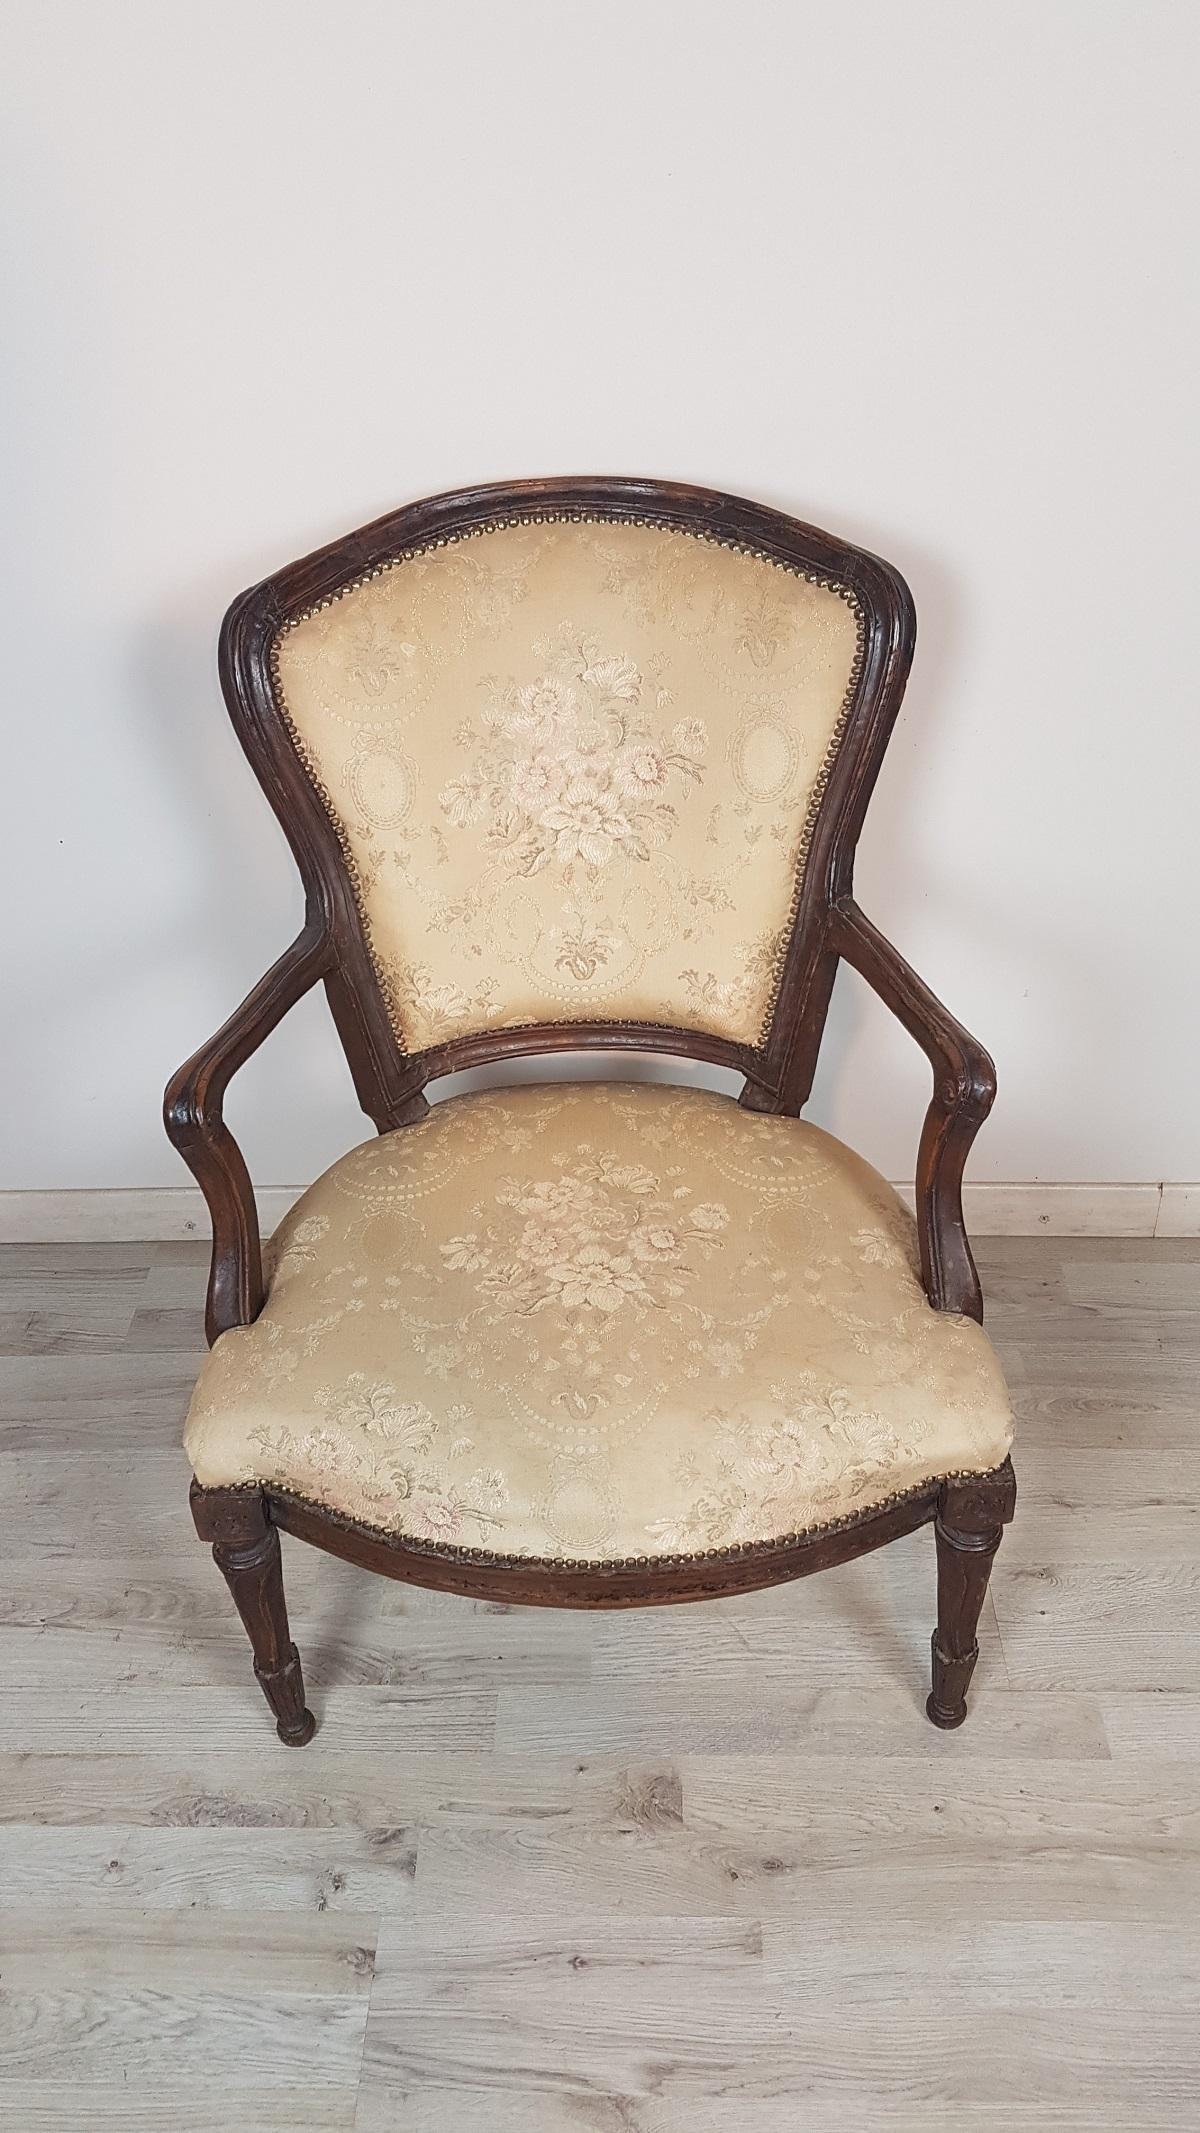 Italian antique armchair Louis XVI period. The shape of the chair is very linear with straight legs in perfect Louis XVI taste. Wide and comfortable seat. Beautiful armchair ideal in your living room or for a desk.
  